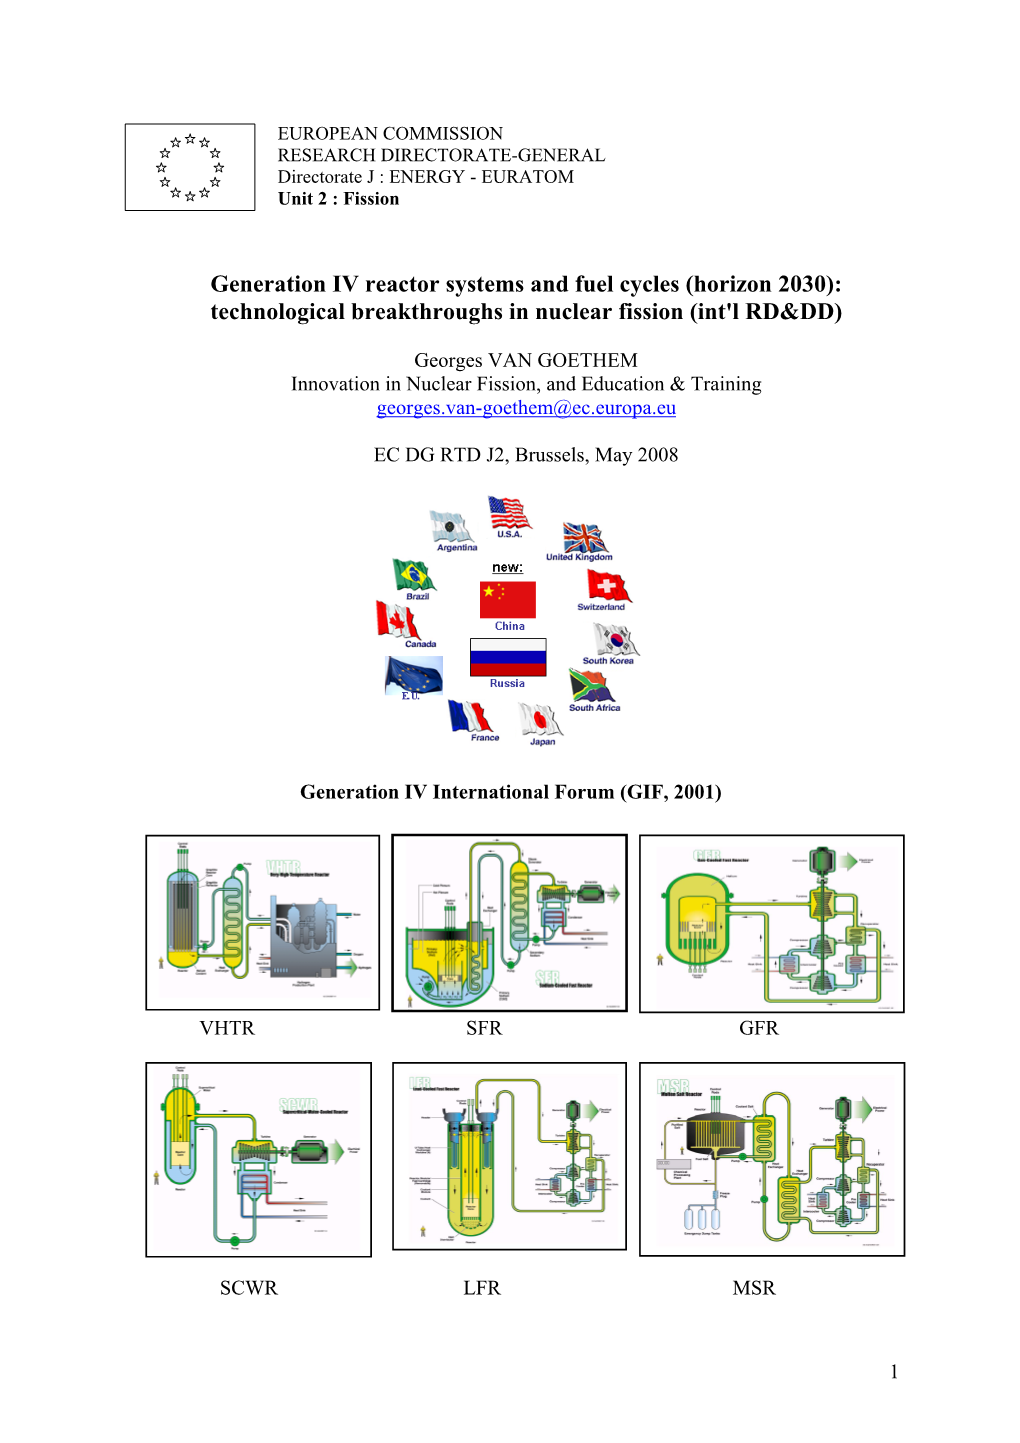 Generation IV Reactor Systems and Fuel Cycles (Horizon 2030): Technological Breakthroughs in Nuclear Fission (Int'l RD&DD)